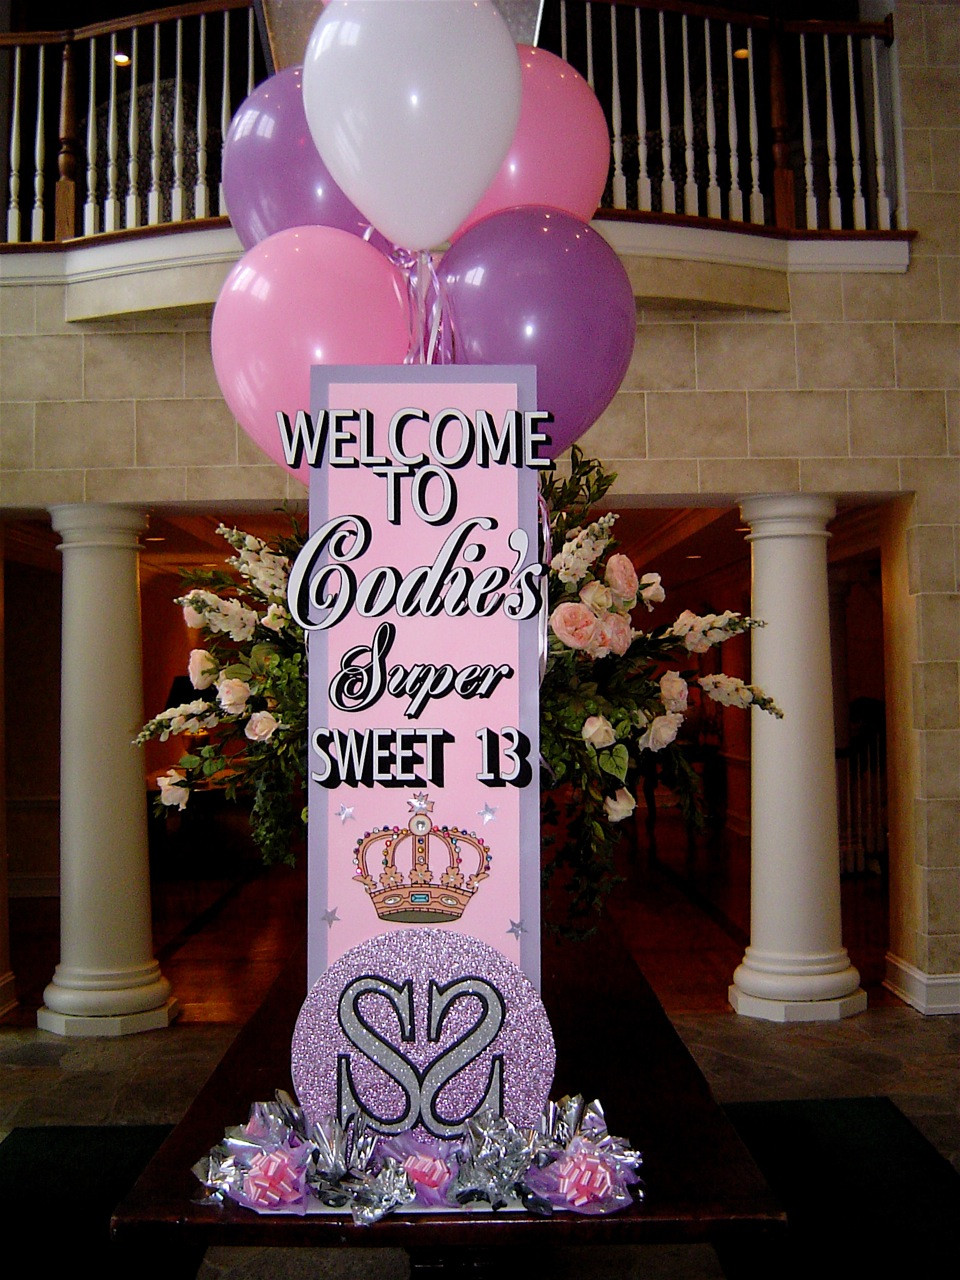 Sixteen Birthday Party Ideas
 Musing with Marlyss Sweet 16 Party Ideas